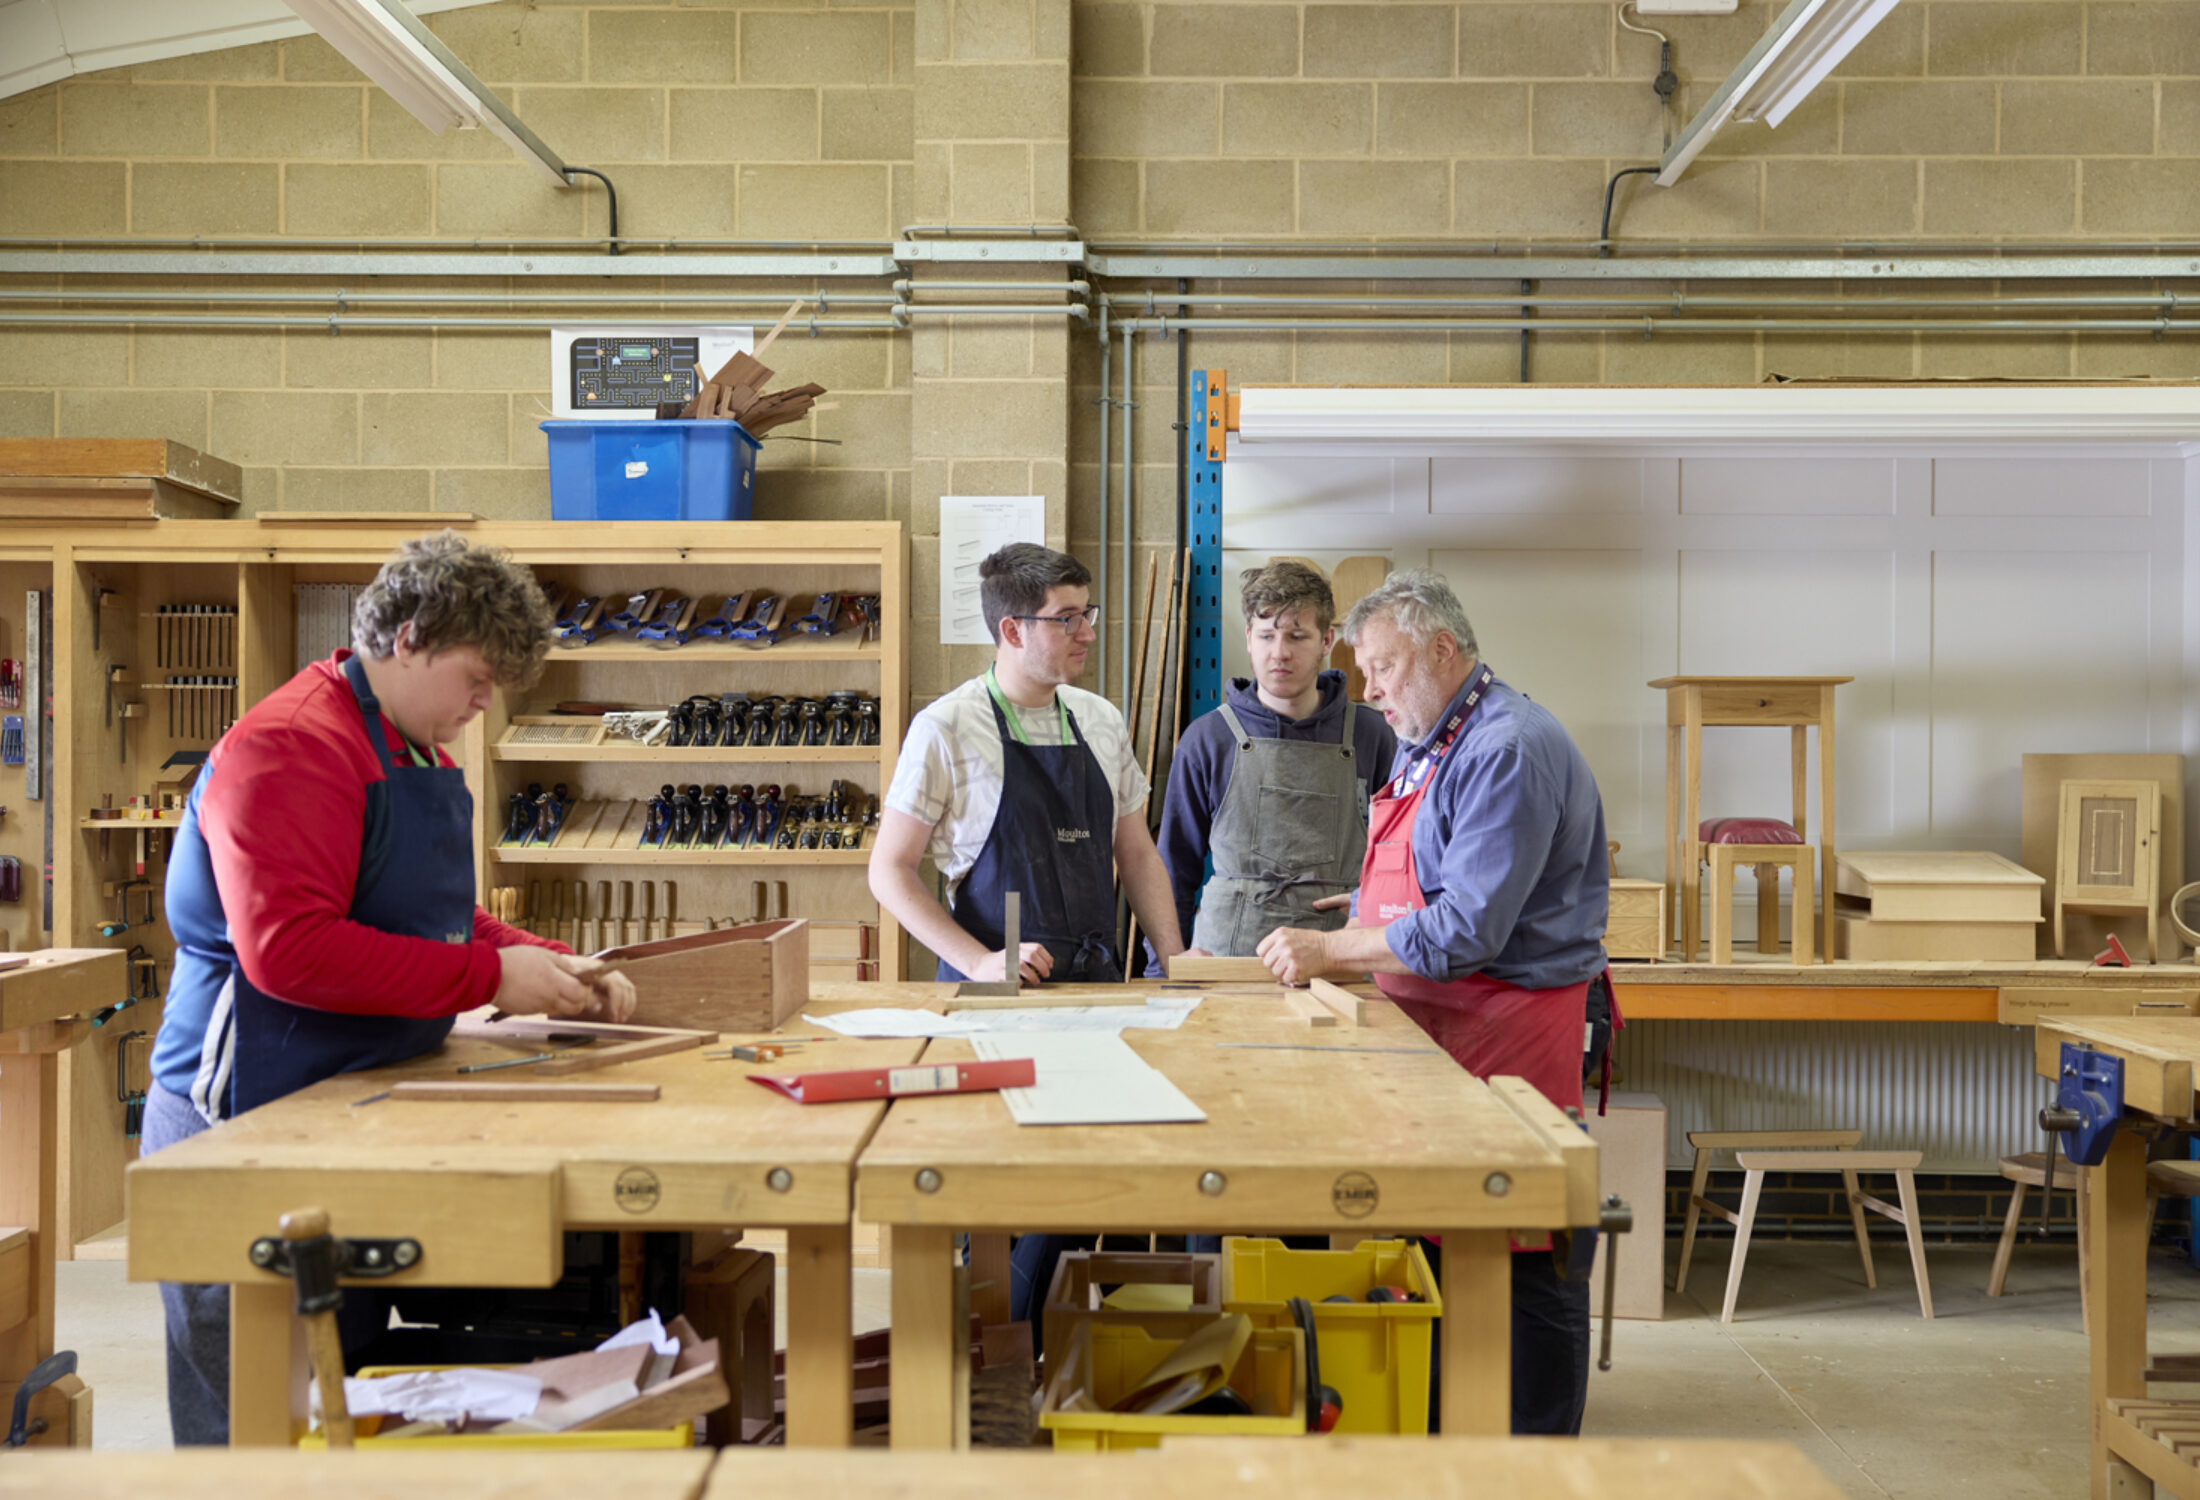 Furniture students and member of staff working together within furniture workshop